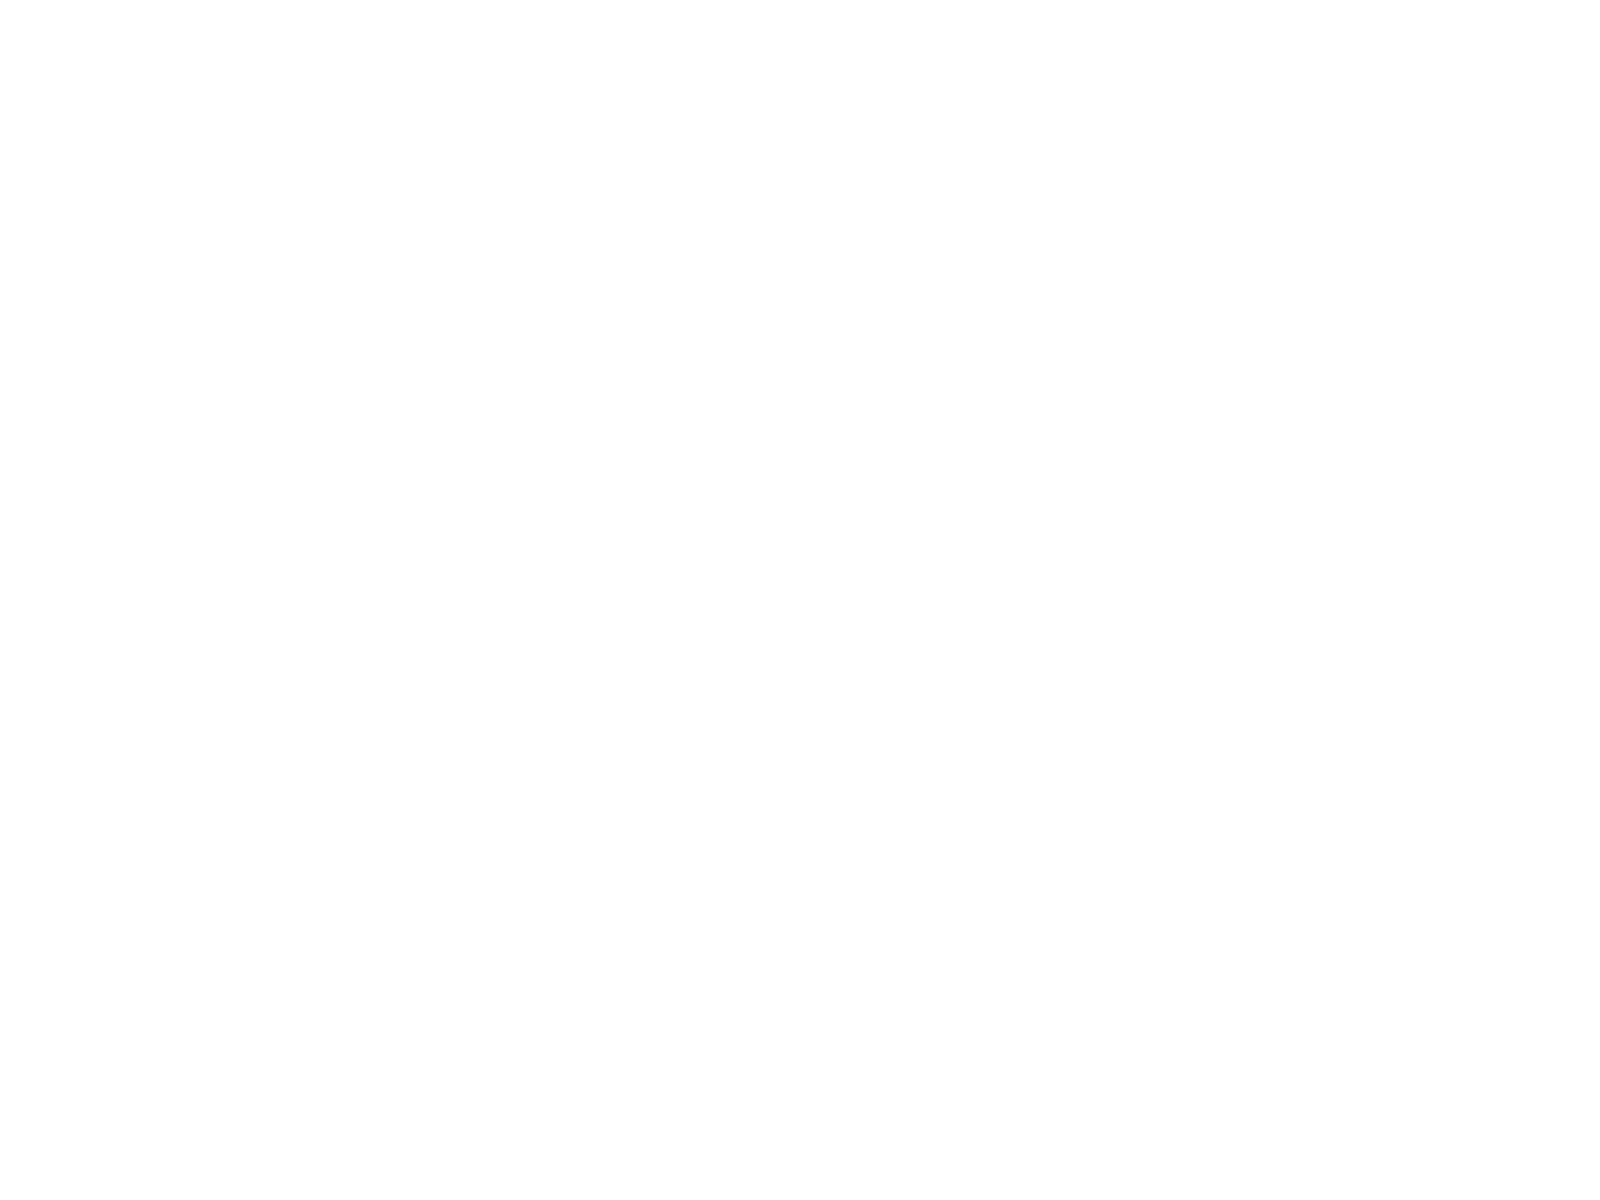 Nations States Line Address Particles PNG